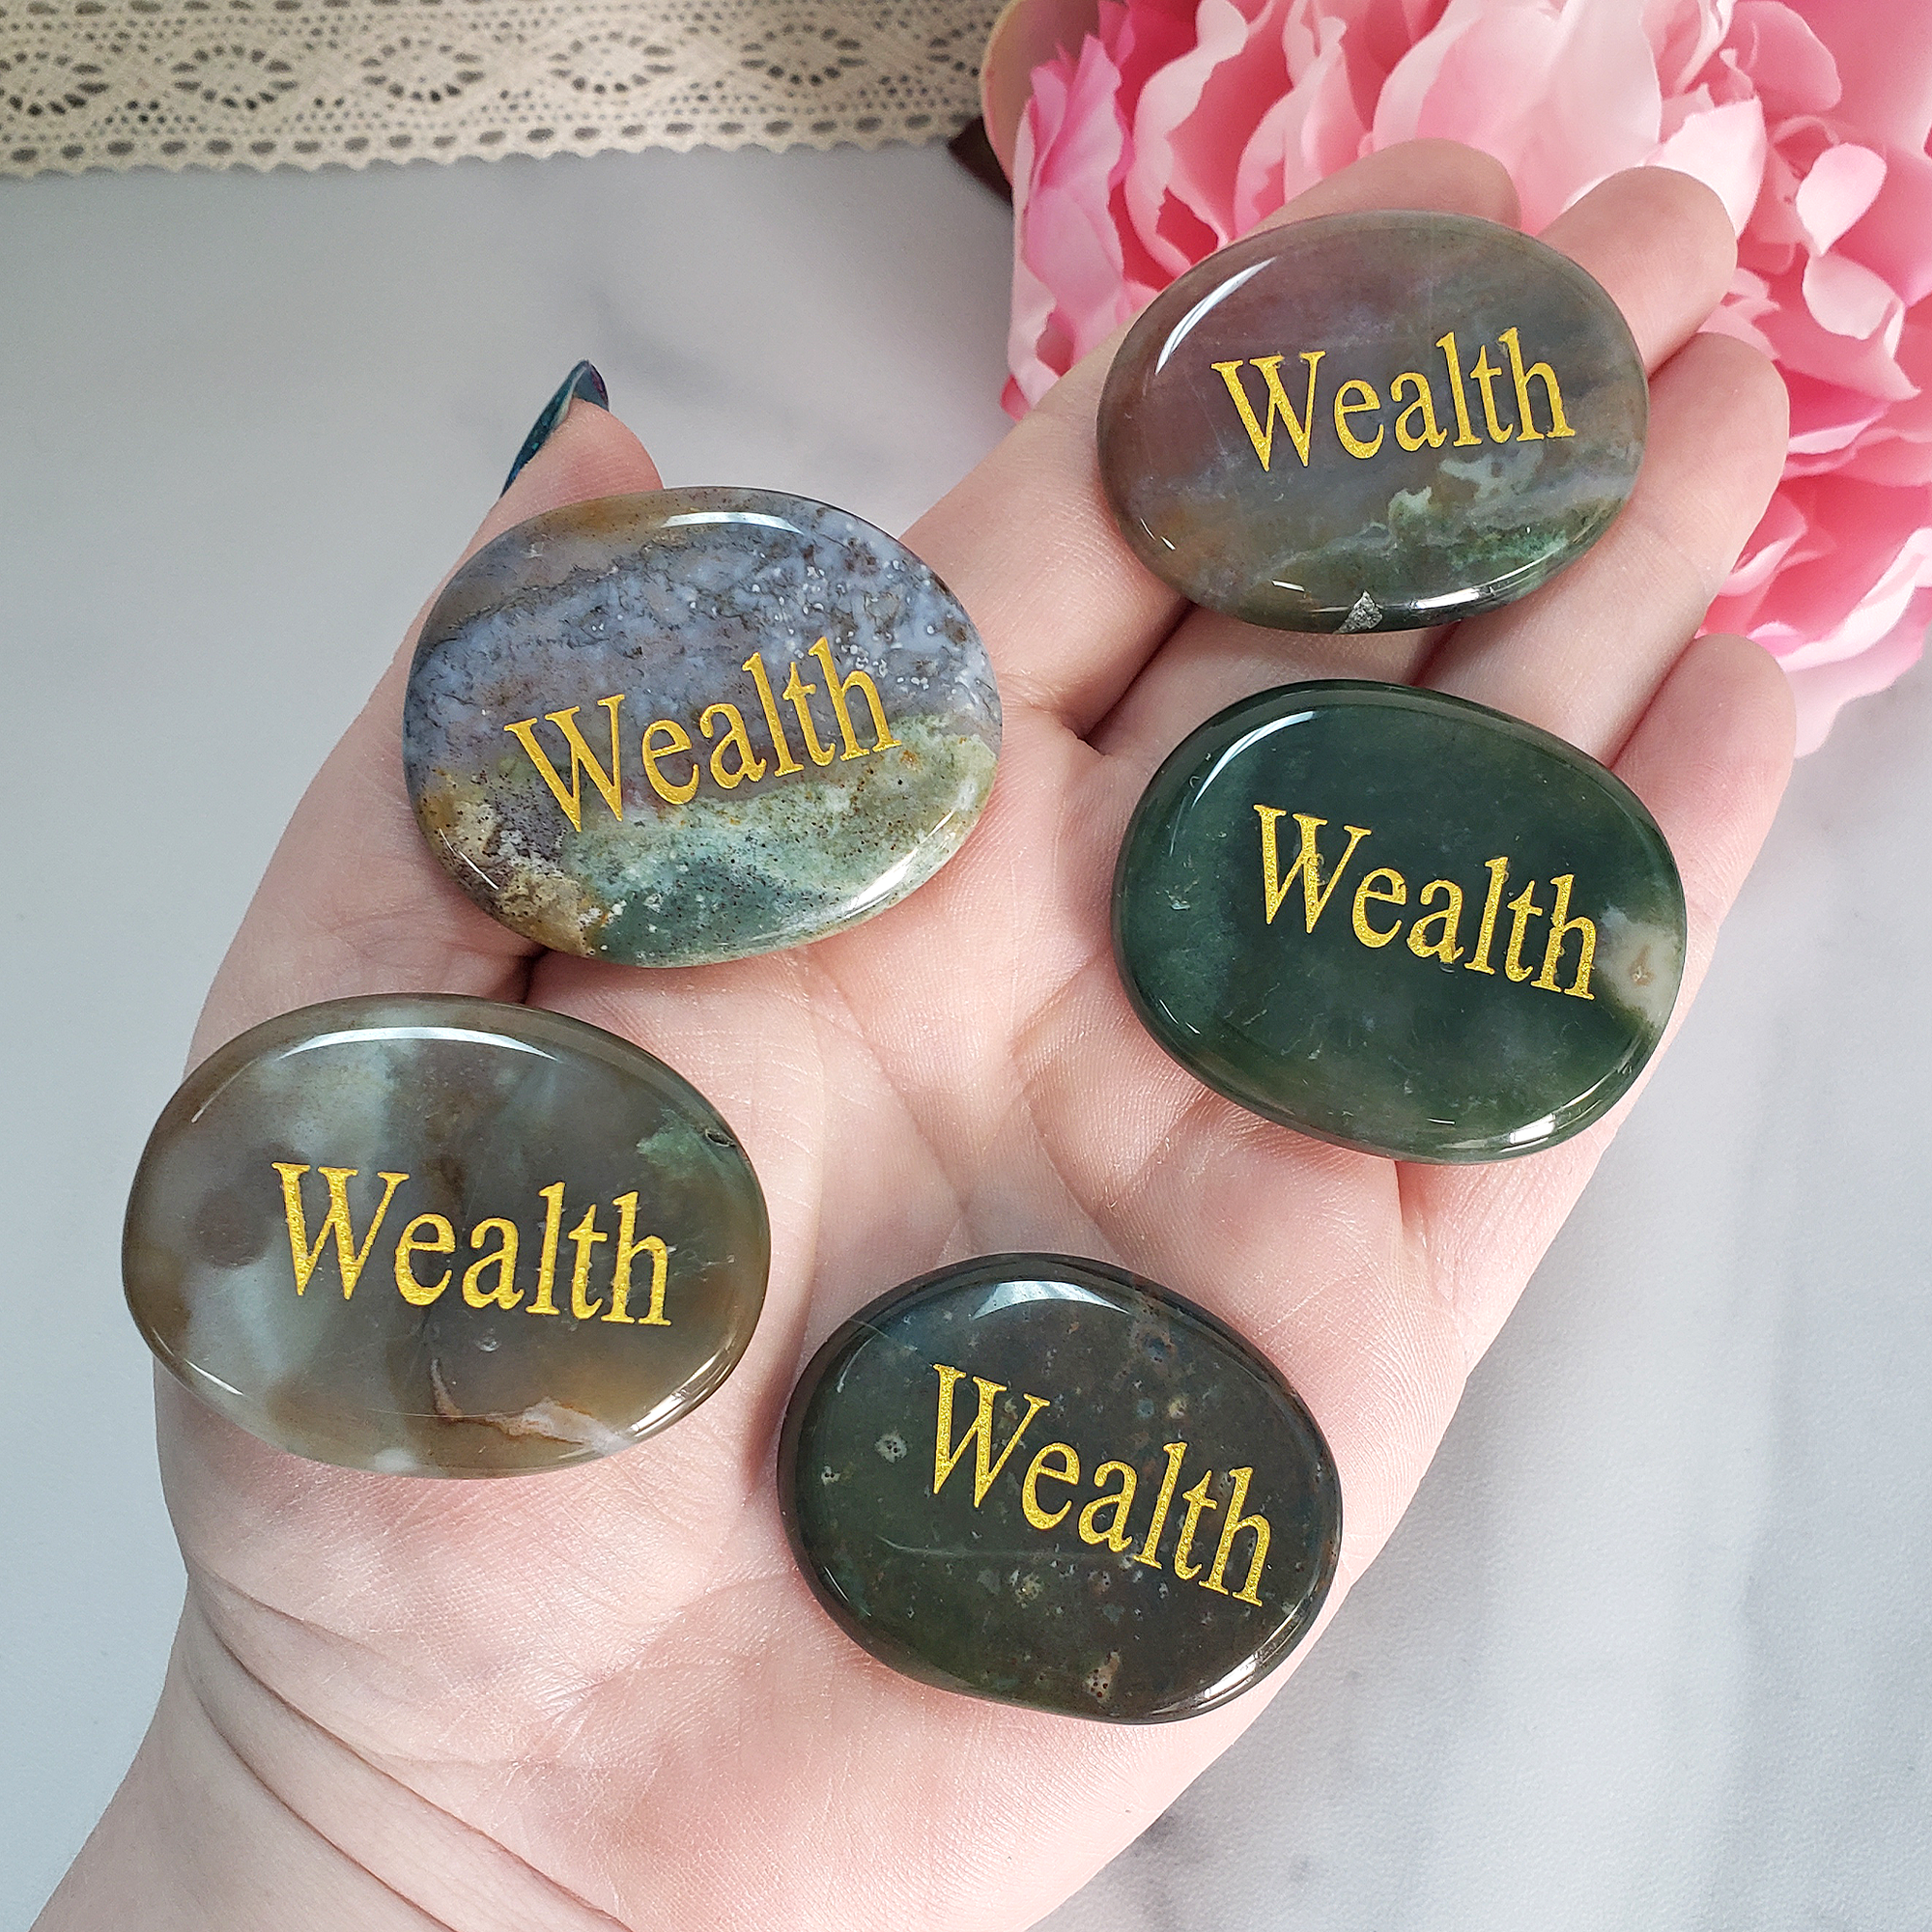 Wealth Affirmation Palm Stone | Crystal Worry Stone with &quot;Wealth&quot; Engraving - Moss Agate, Fancy Agate, Fancy Jasper